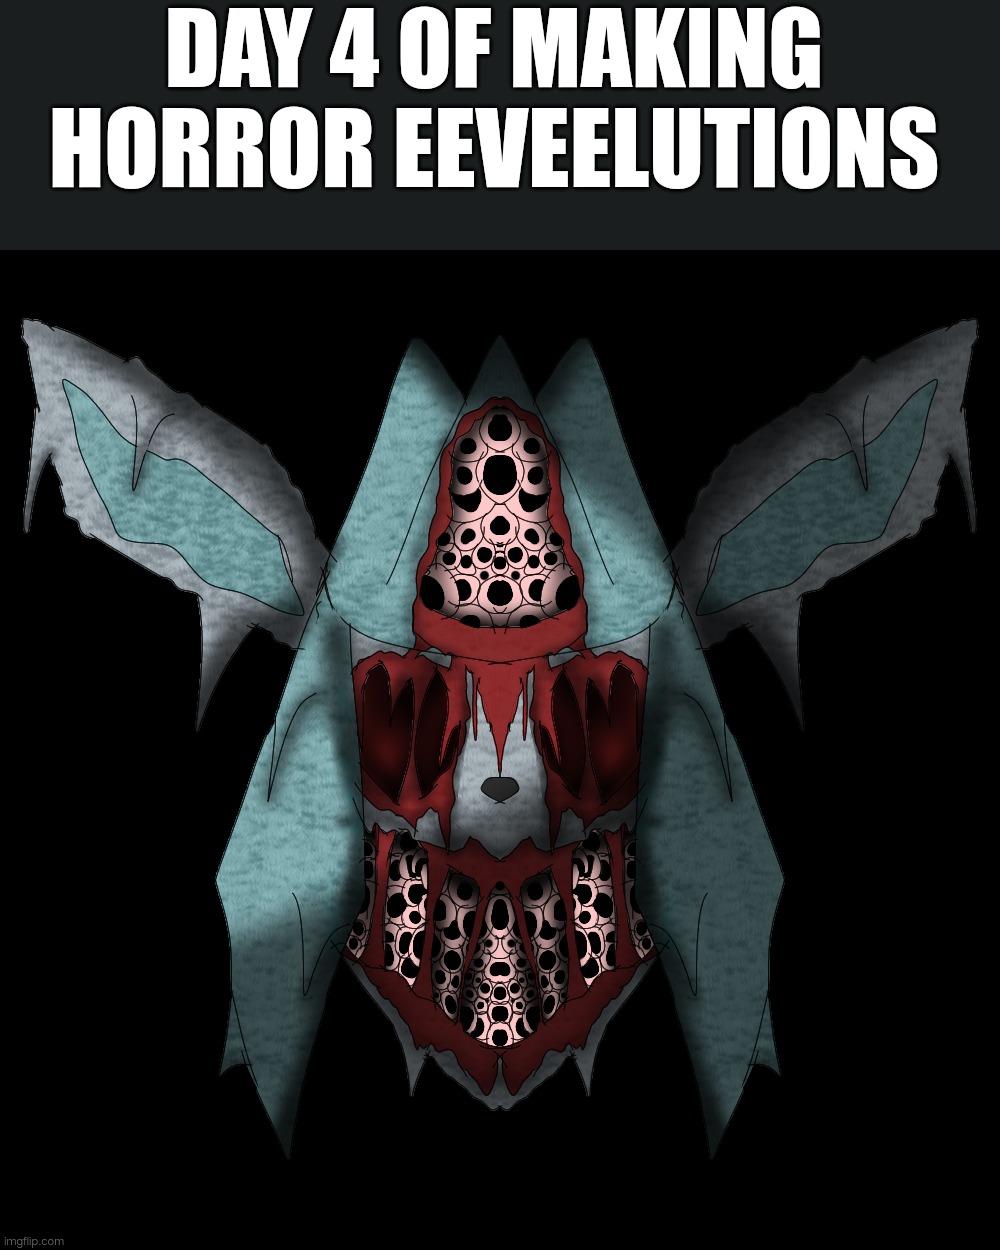 You thought i was done yet?(also would blood count as NSFW) | DAY 4 OF MAKING HORROR EEVEELUTIONS | made w/ Imgflip meme maker